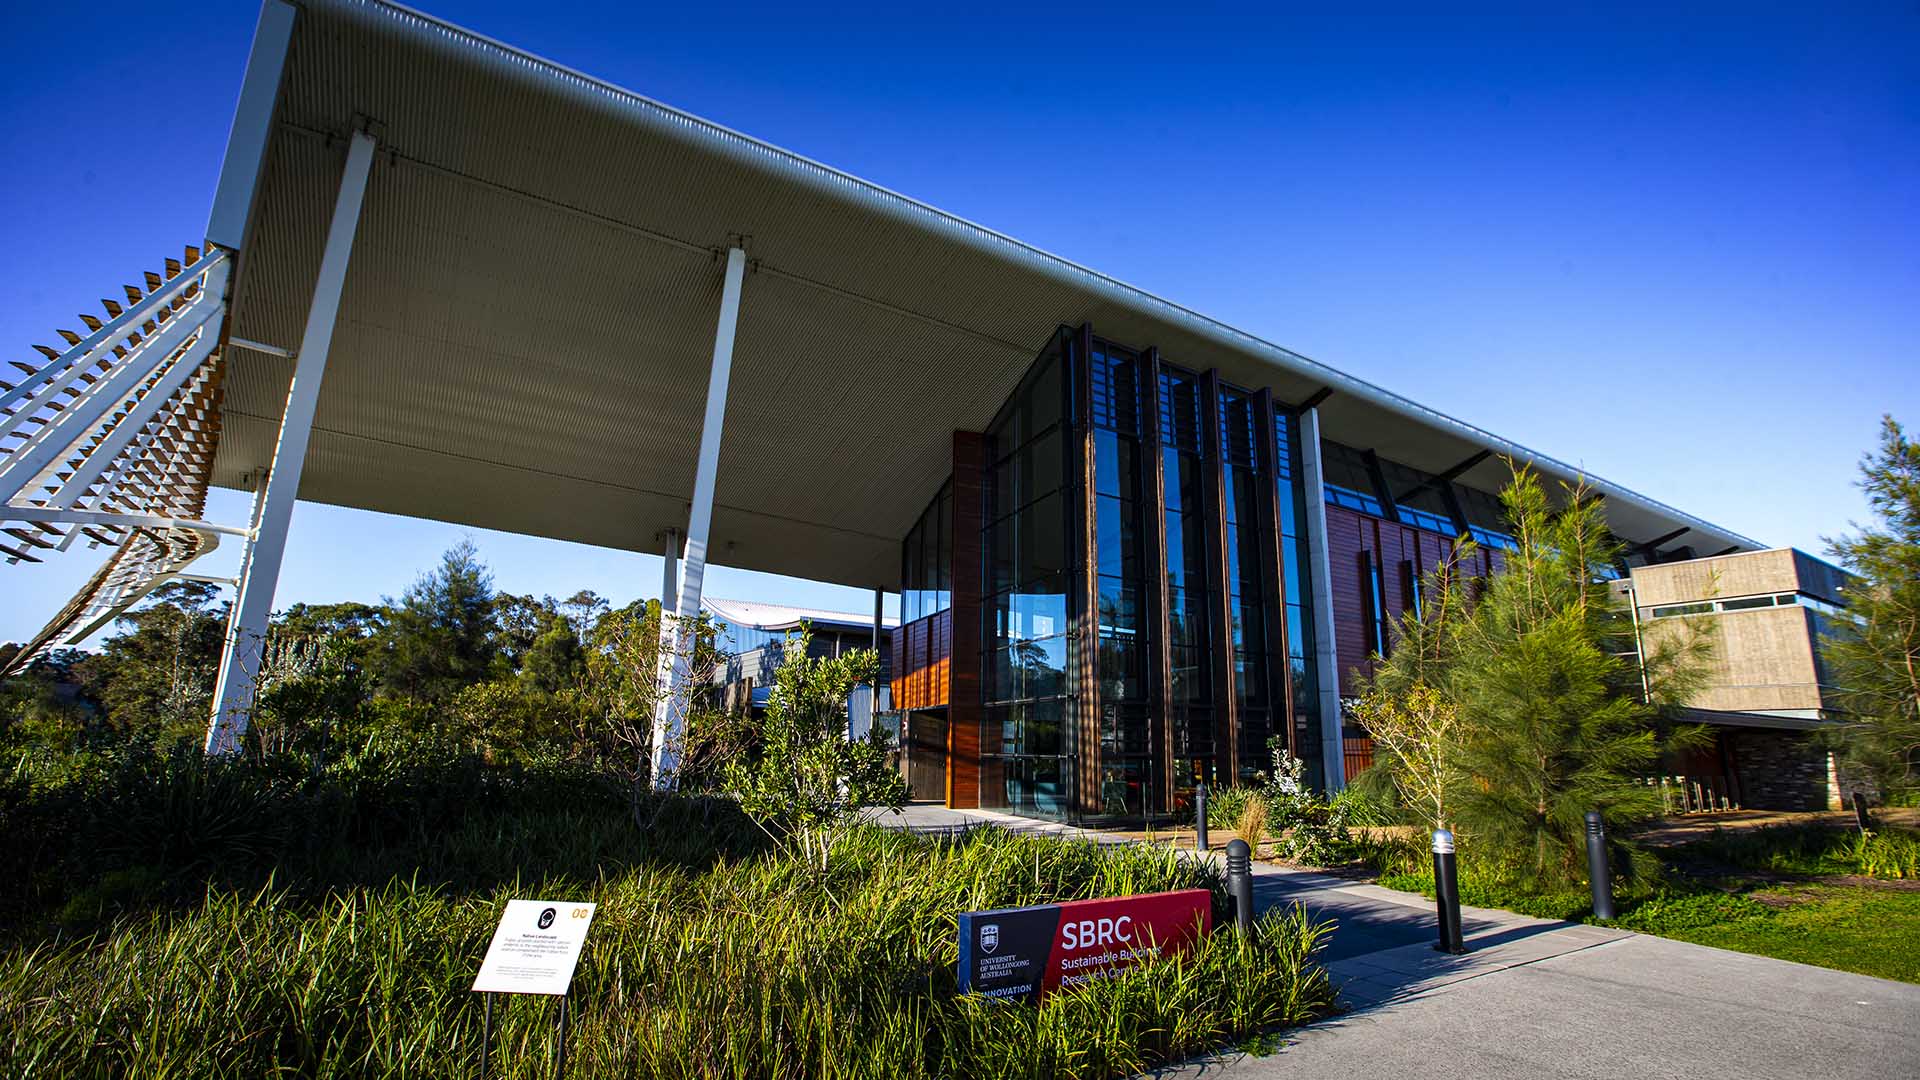 University of Wollongong home to Australia’s most sustainable building